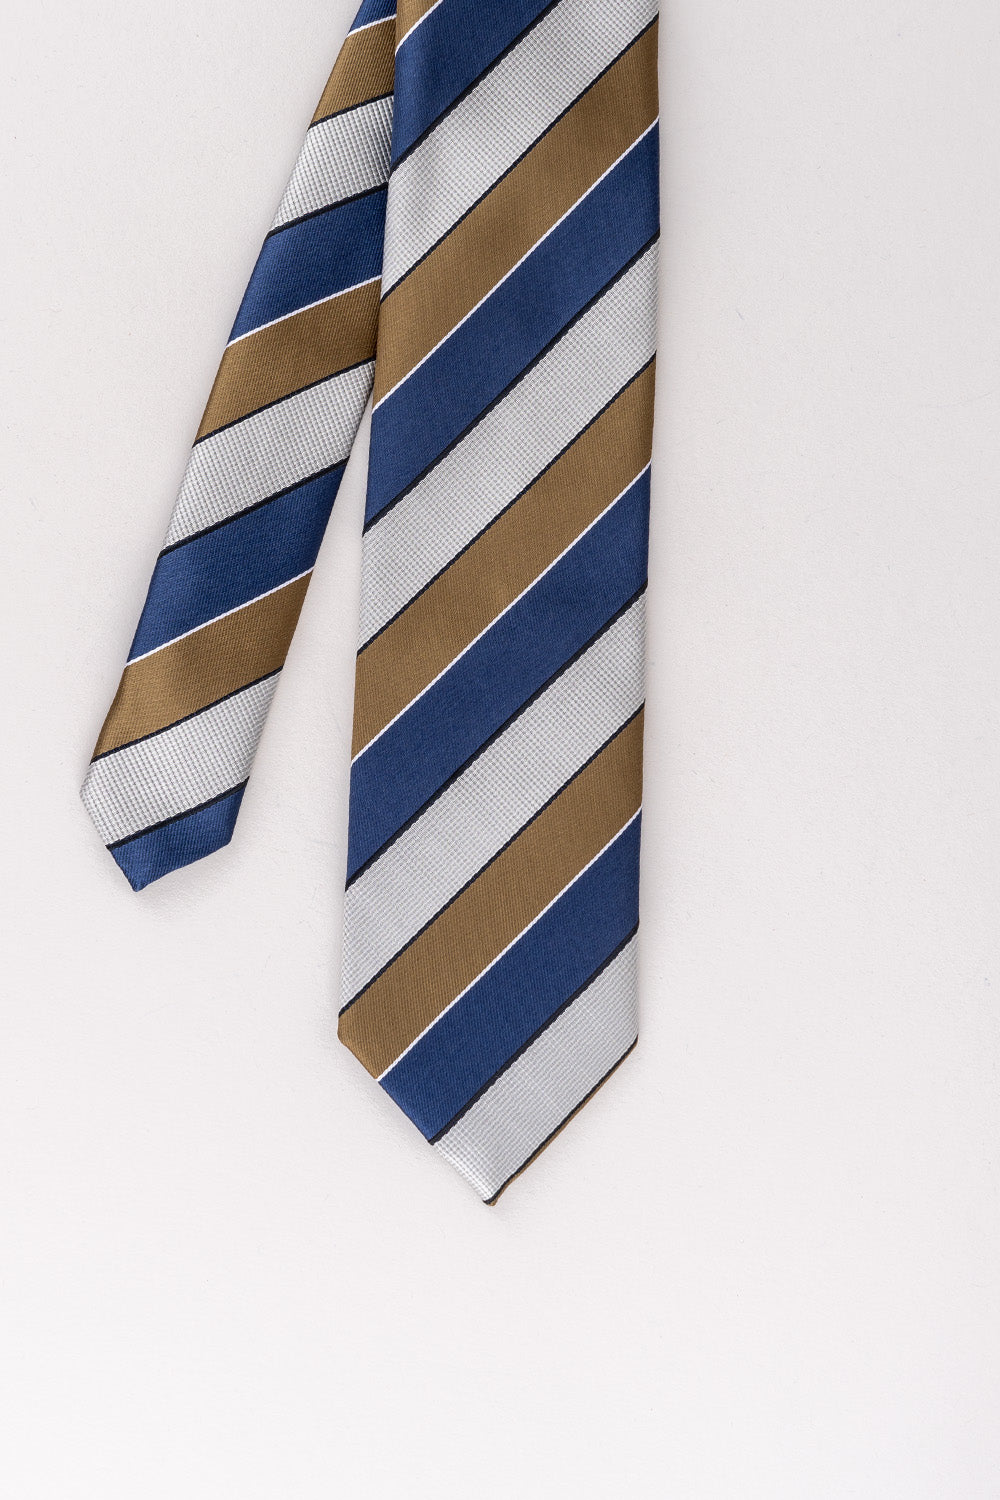 Archie Navy/Brown Striped Mens Tie Oswin Hyde